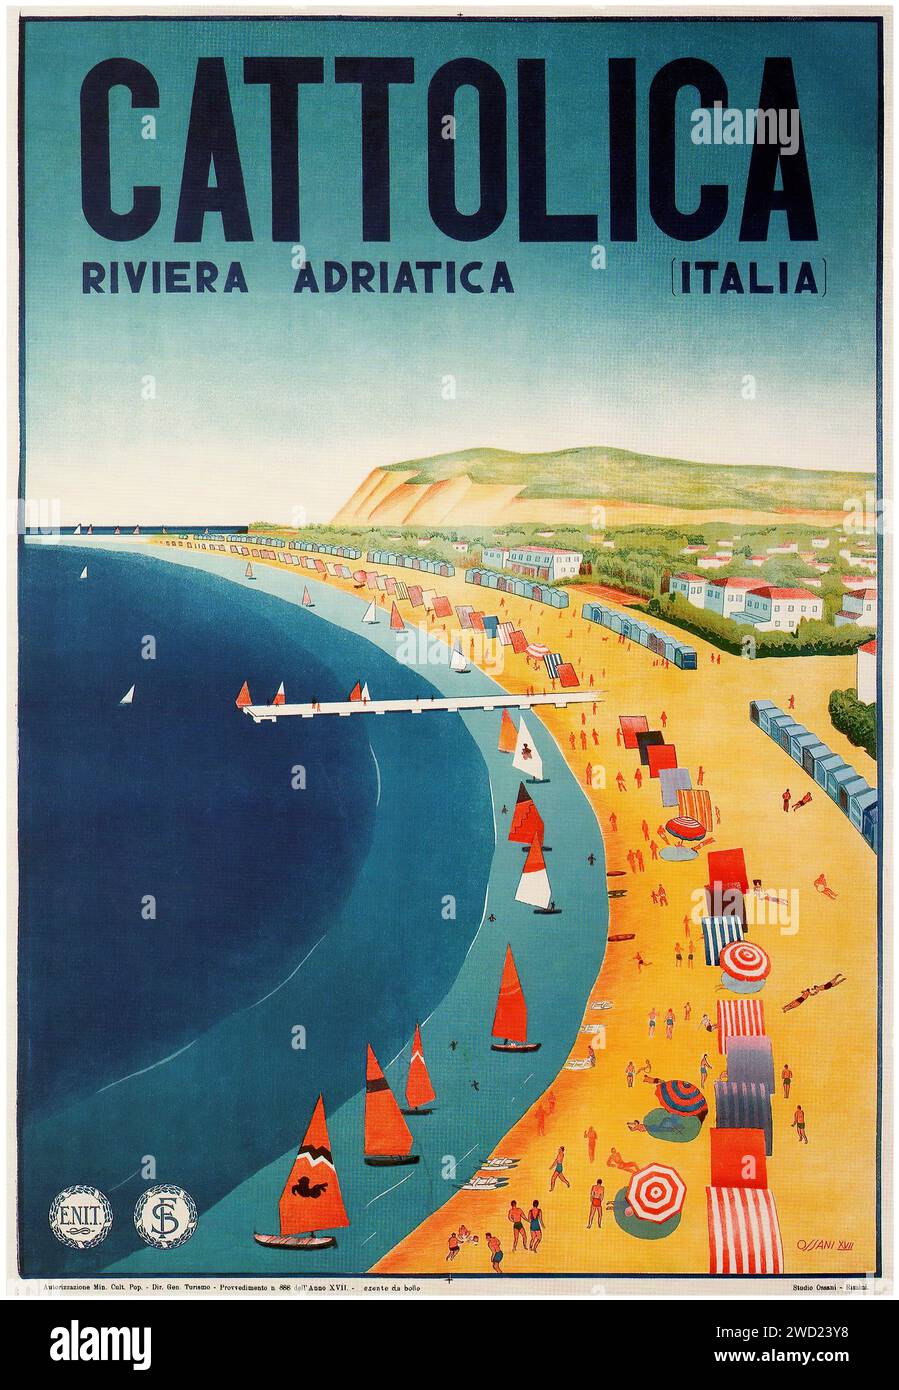 'CATTOLICA' 'RIVIERA ADRIATICA (ITALIA)' 'Ossani' 'CATTOLICA' 'ADRIATIC RIVIERA (ITALY)' 'Ossani' A vibrant poster depicting the beachfront of Cattolica on the Adriatic Riviera. The style is typical of the early 20th-century travel posters, with bright colors and a panoramic view inviting tourists to the seaside. Stock Photo